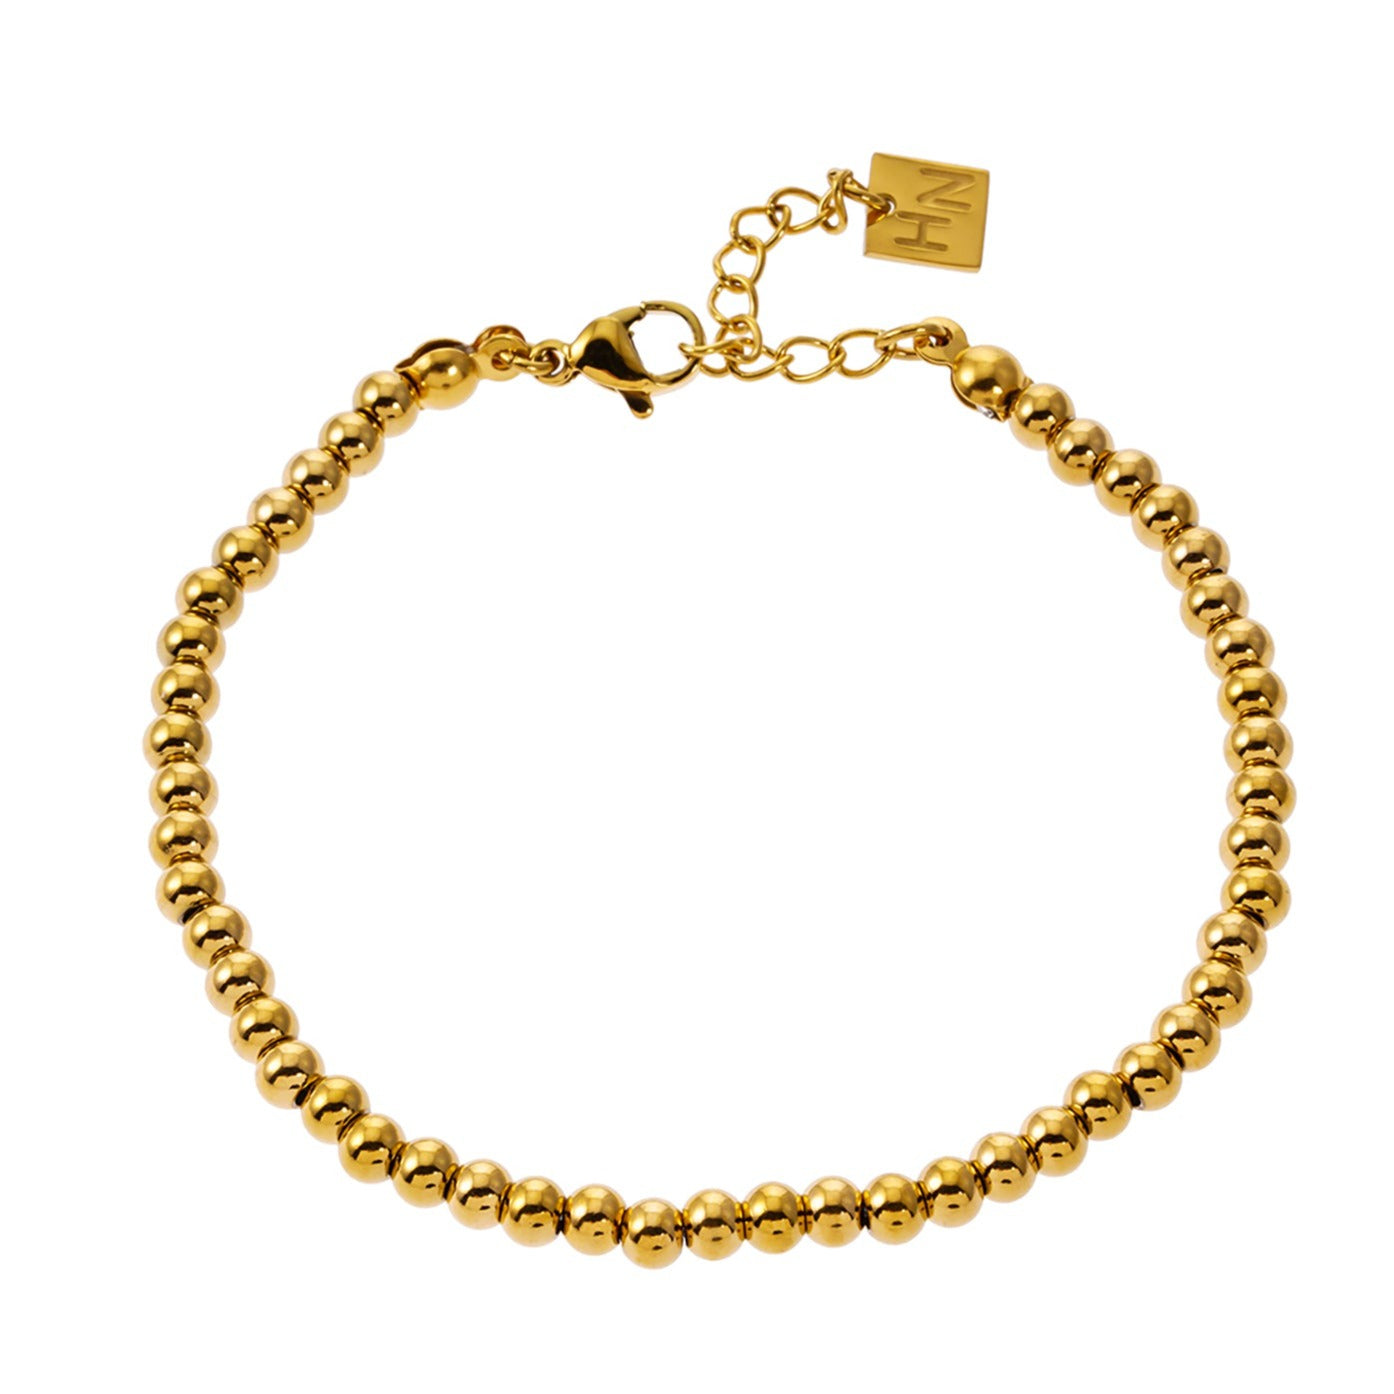 Style MANAMI 4662: Ball-Beads Contemporary Chain Bracelet.